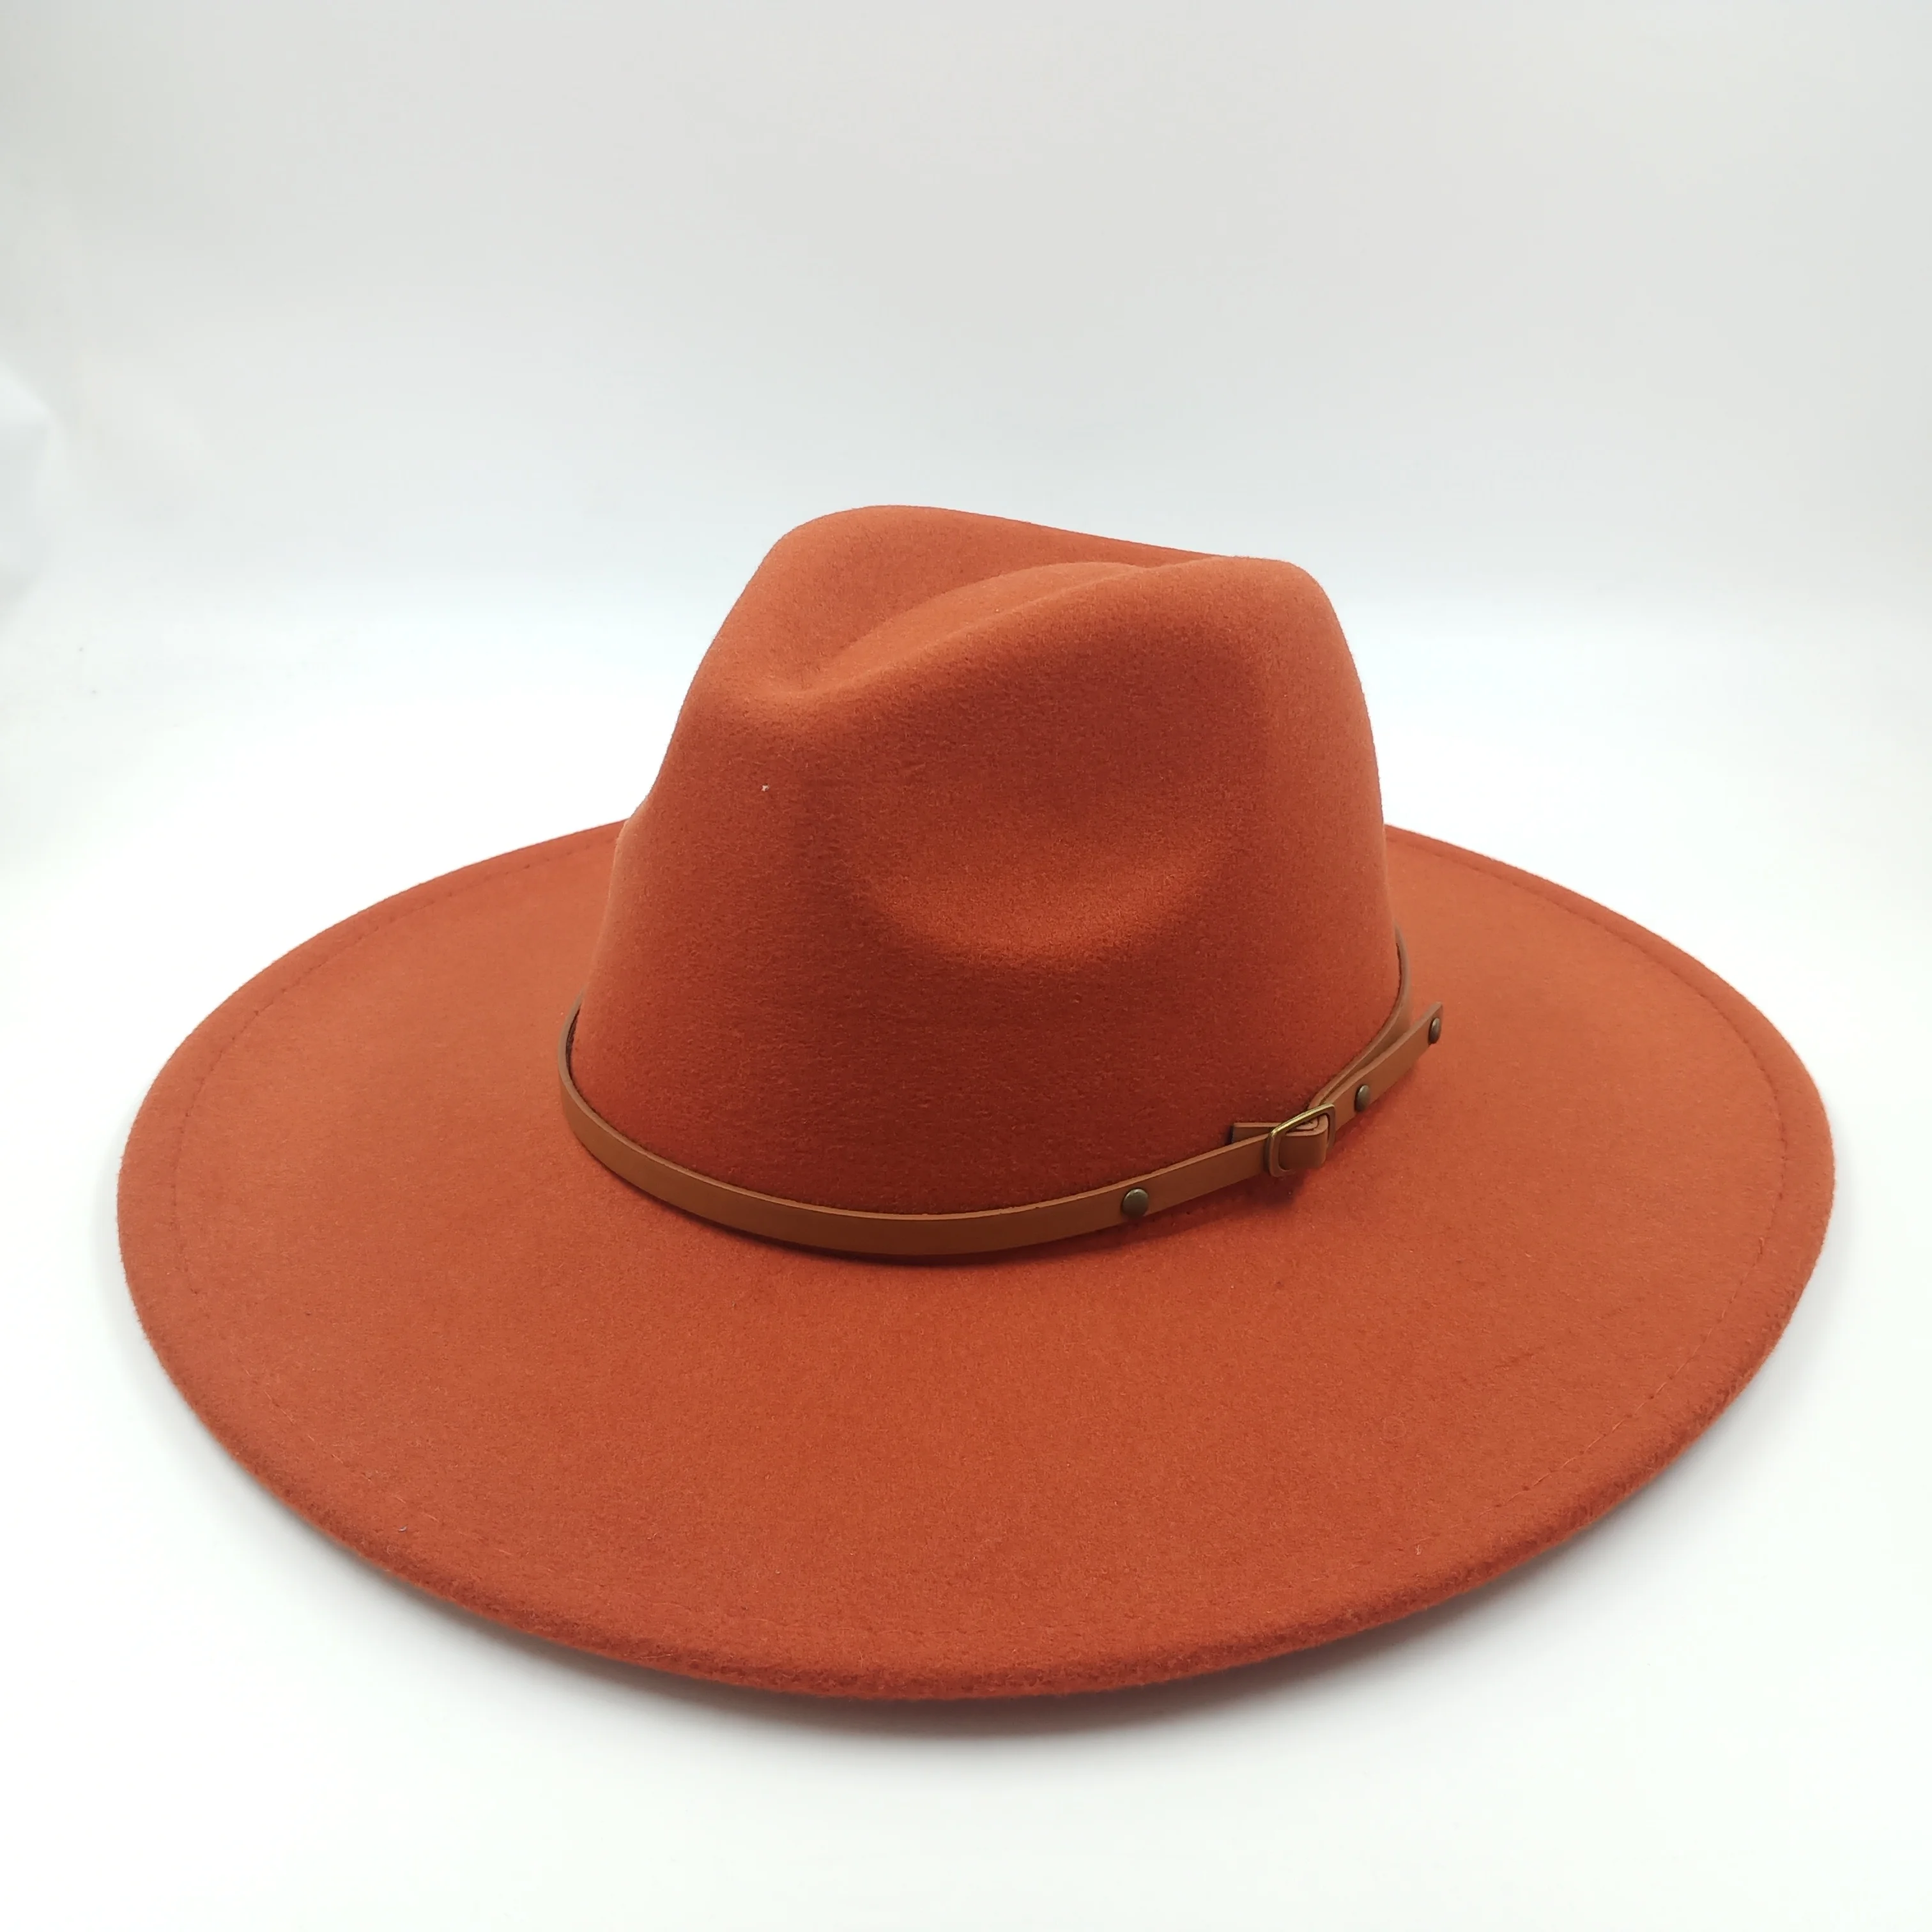 New color Fedora winter hat top concave-convex water drop 9.5cm brim male and female felt jazz watermelon red шляпа женская summer fedora